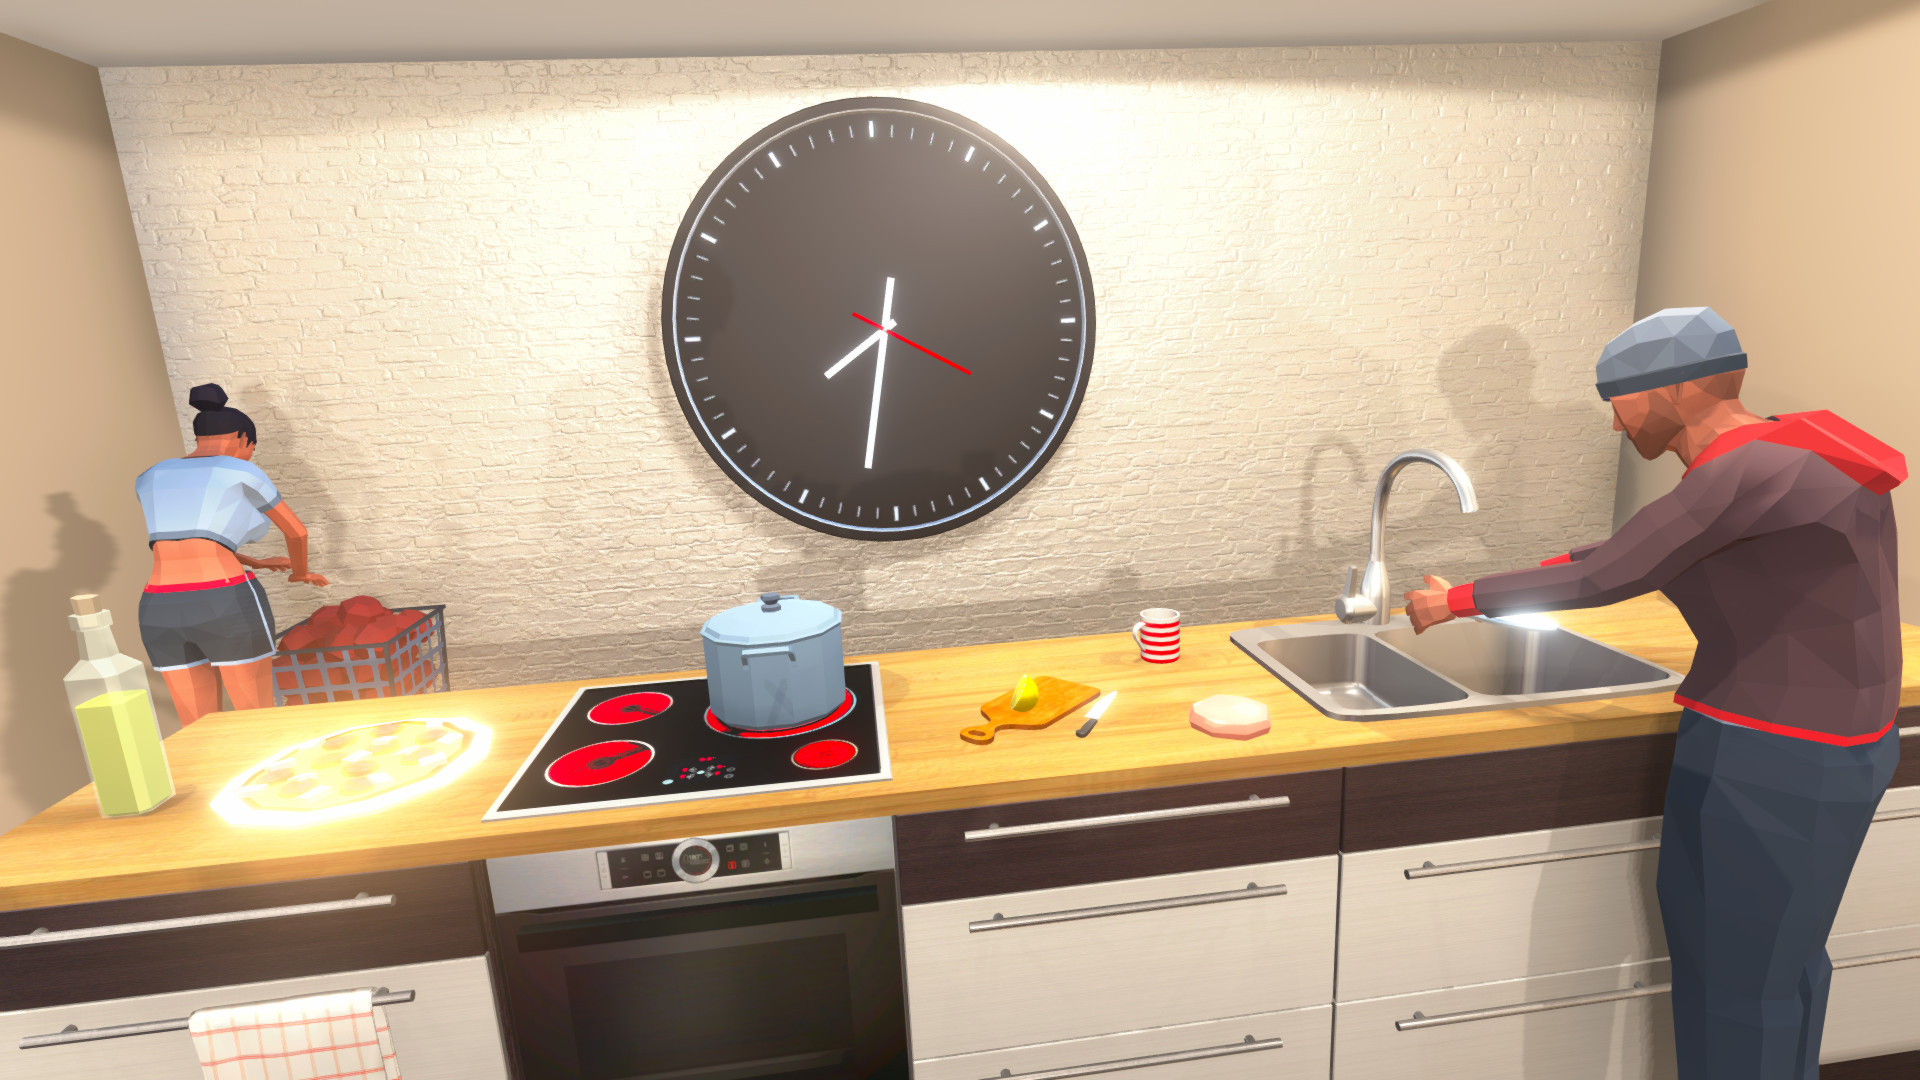 Amazing food causes Kitchen Explosion! - Cooking Simulator Gameplay 